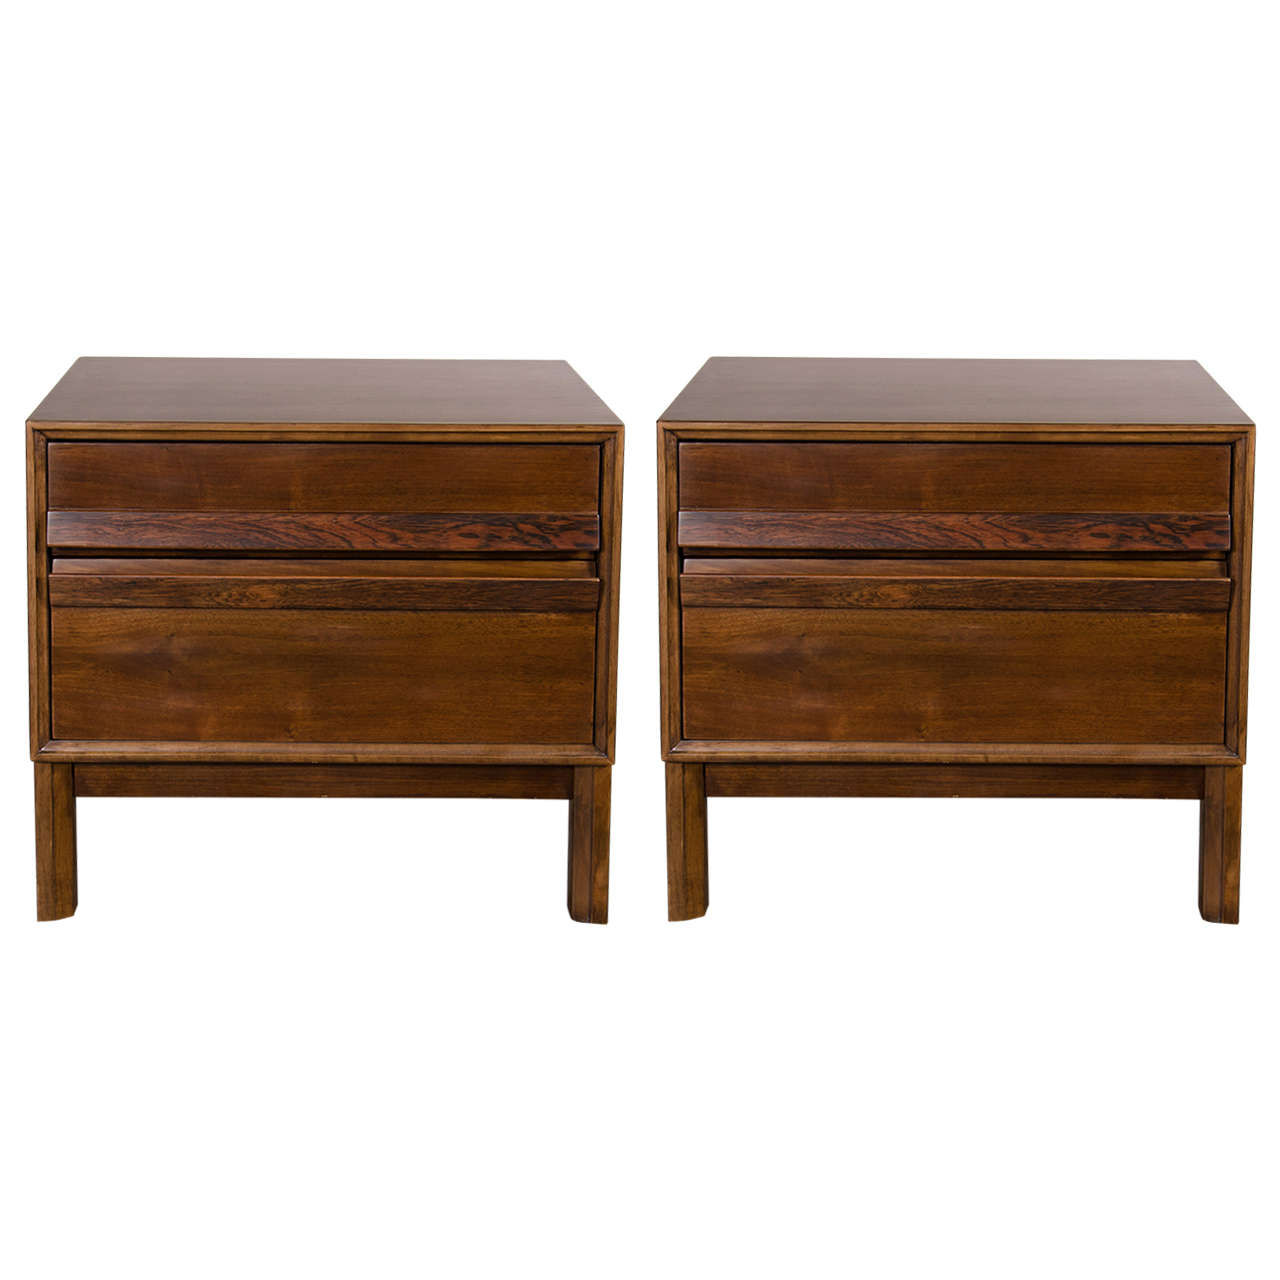 Pair of Mid-Century Modernist Night Stands or End Tables in Hand Rubbed Walnut